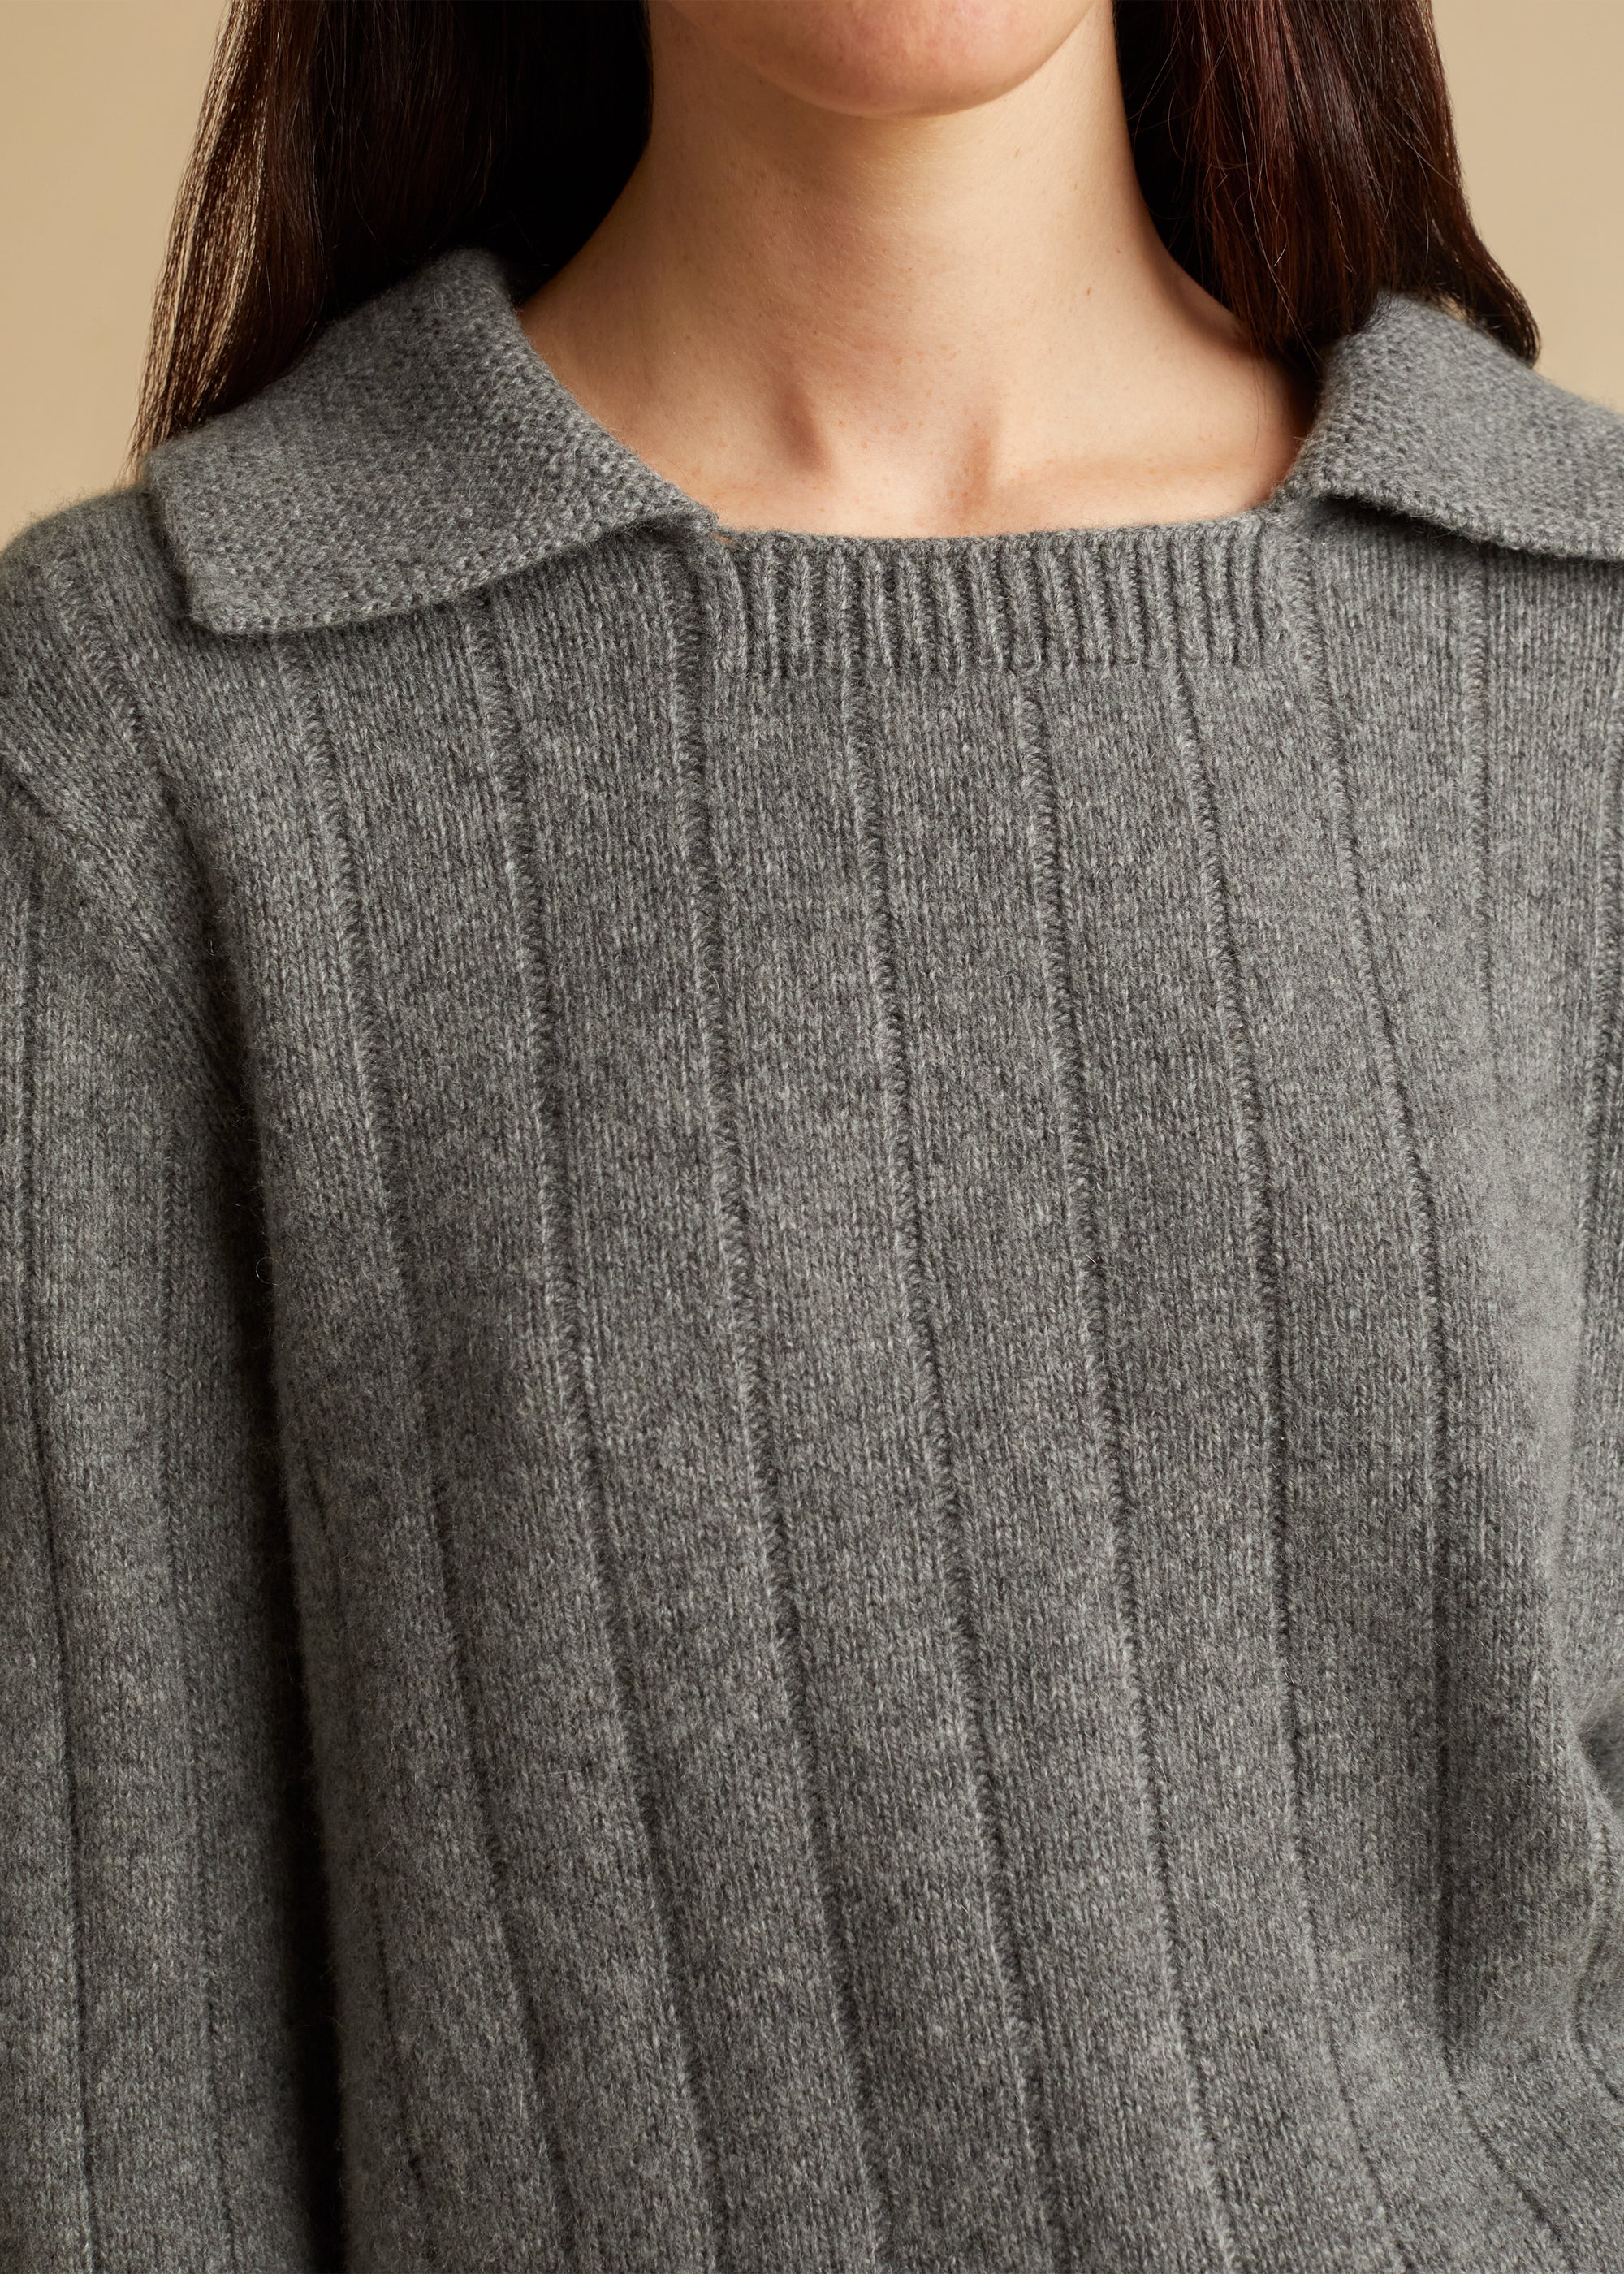 Mateo sweater in cashmere - Sterling